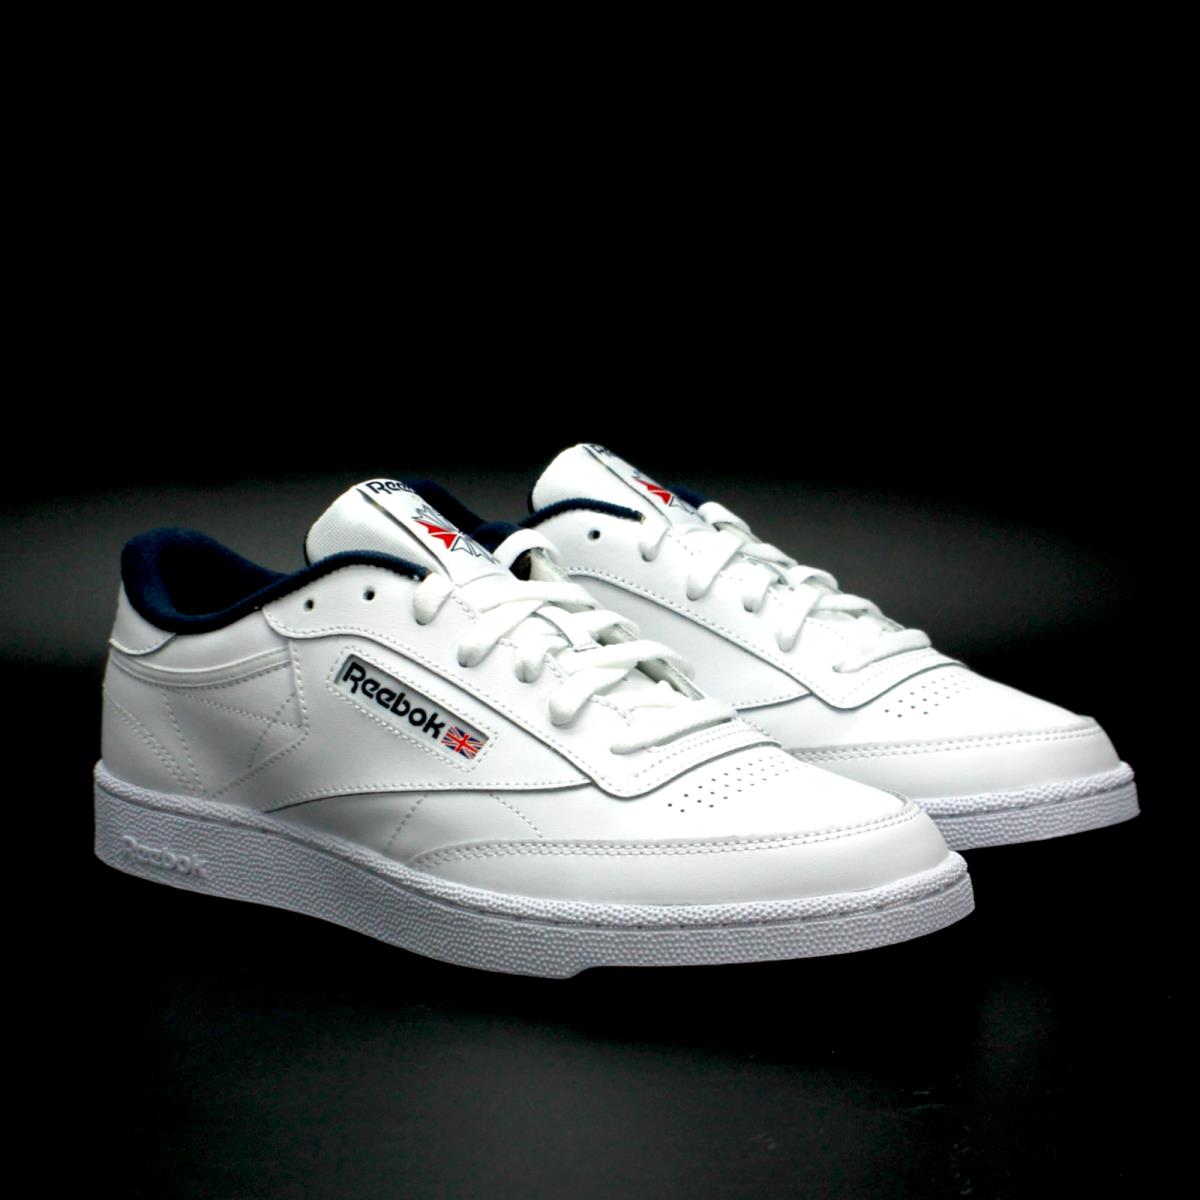 Reebok Club C 85 Men`s Classic Low Top Athletic Shoes White Navy Size 7.5